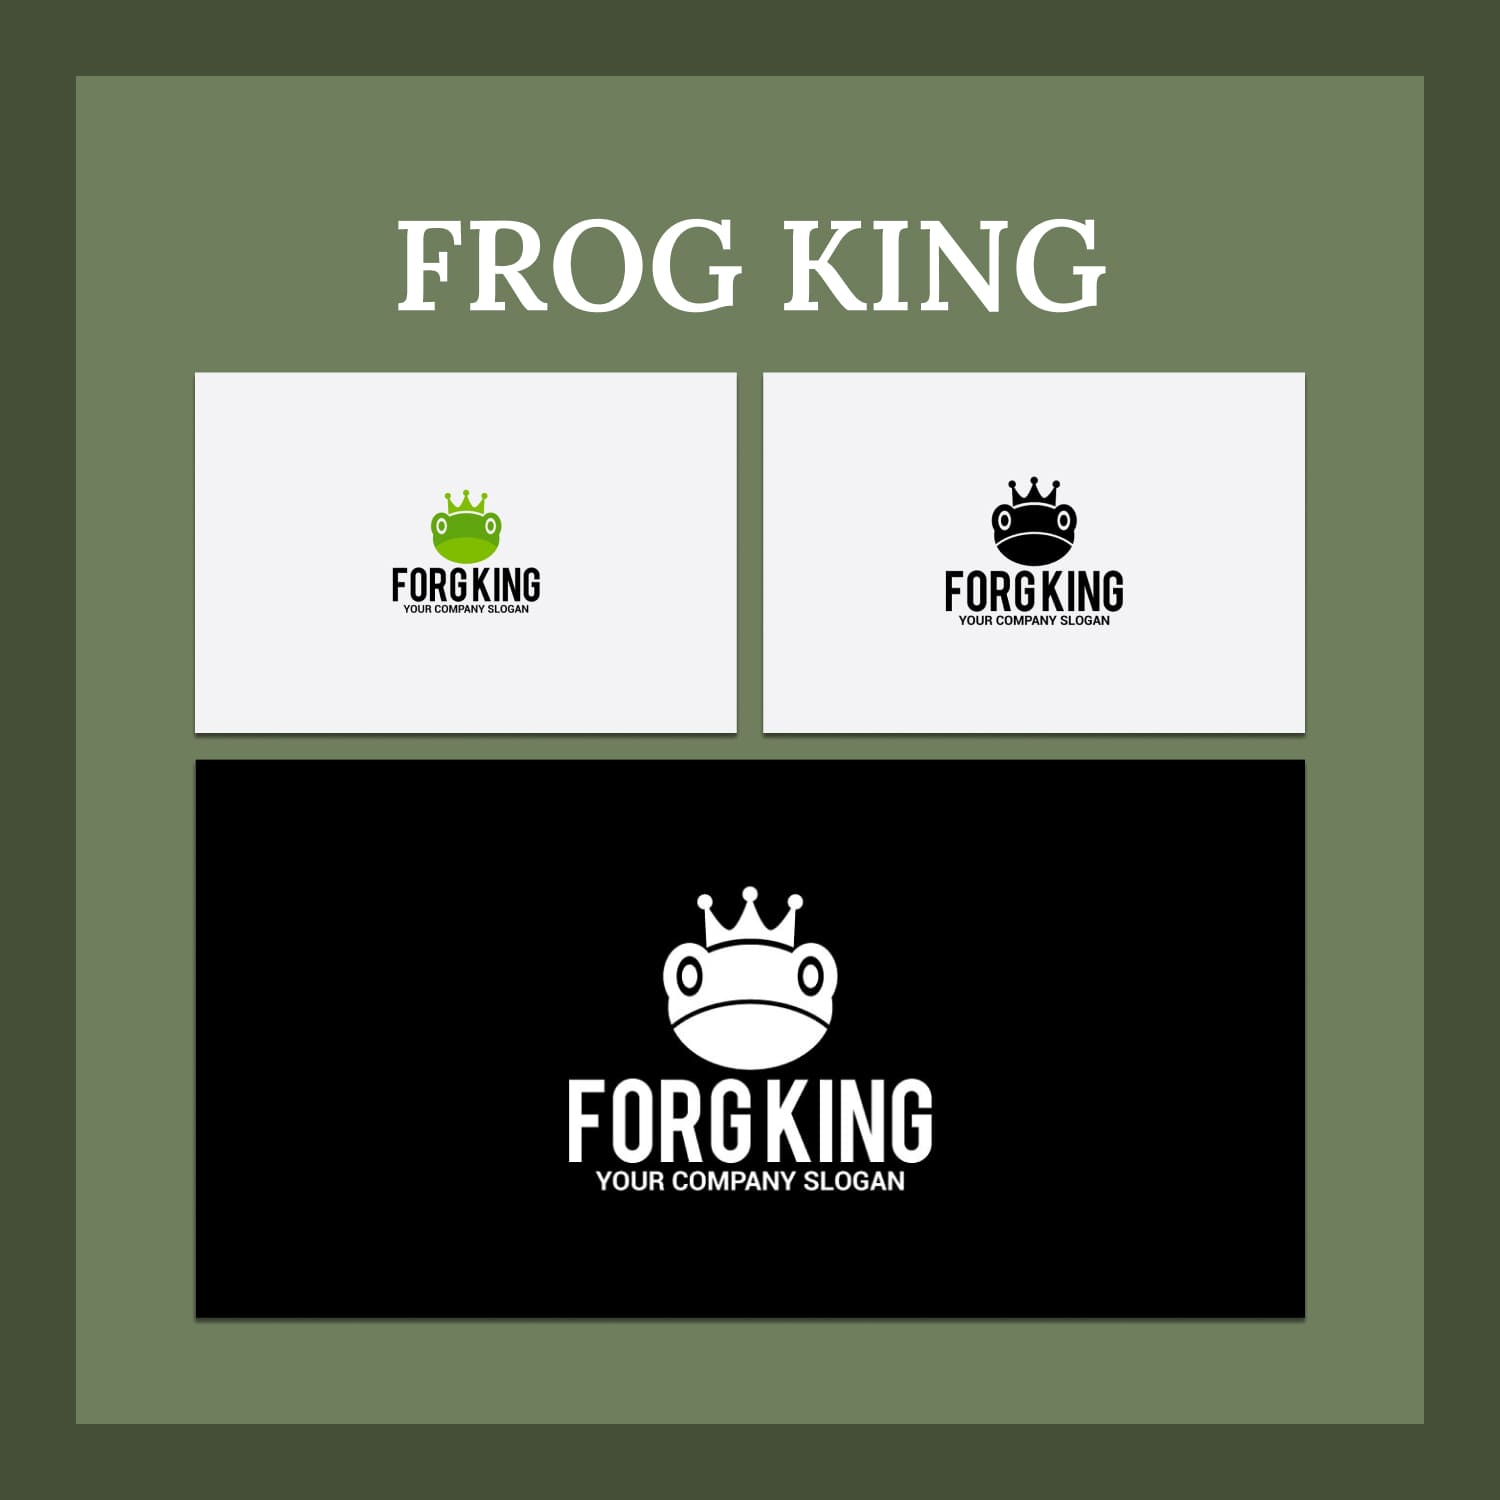 Frog king - main image preview.